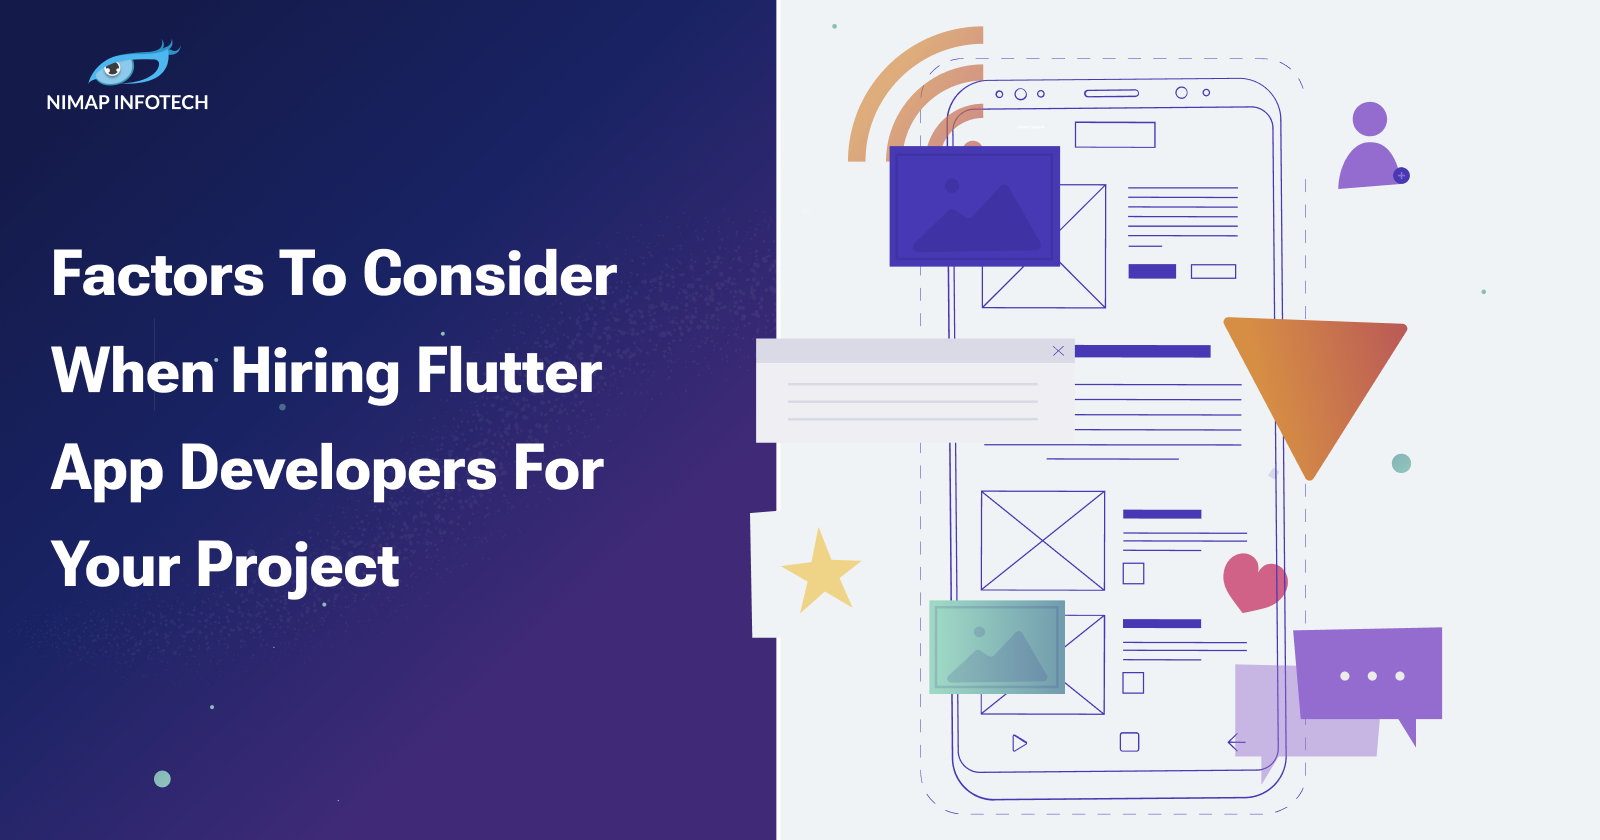 Factors To Consider When Hiring Flutter App Developers For Your Project